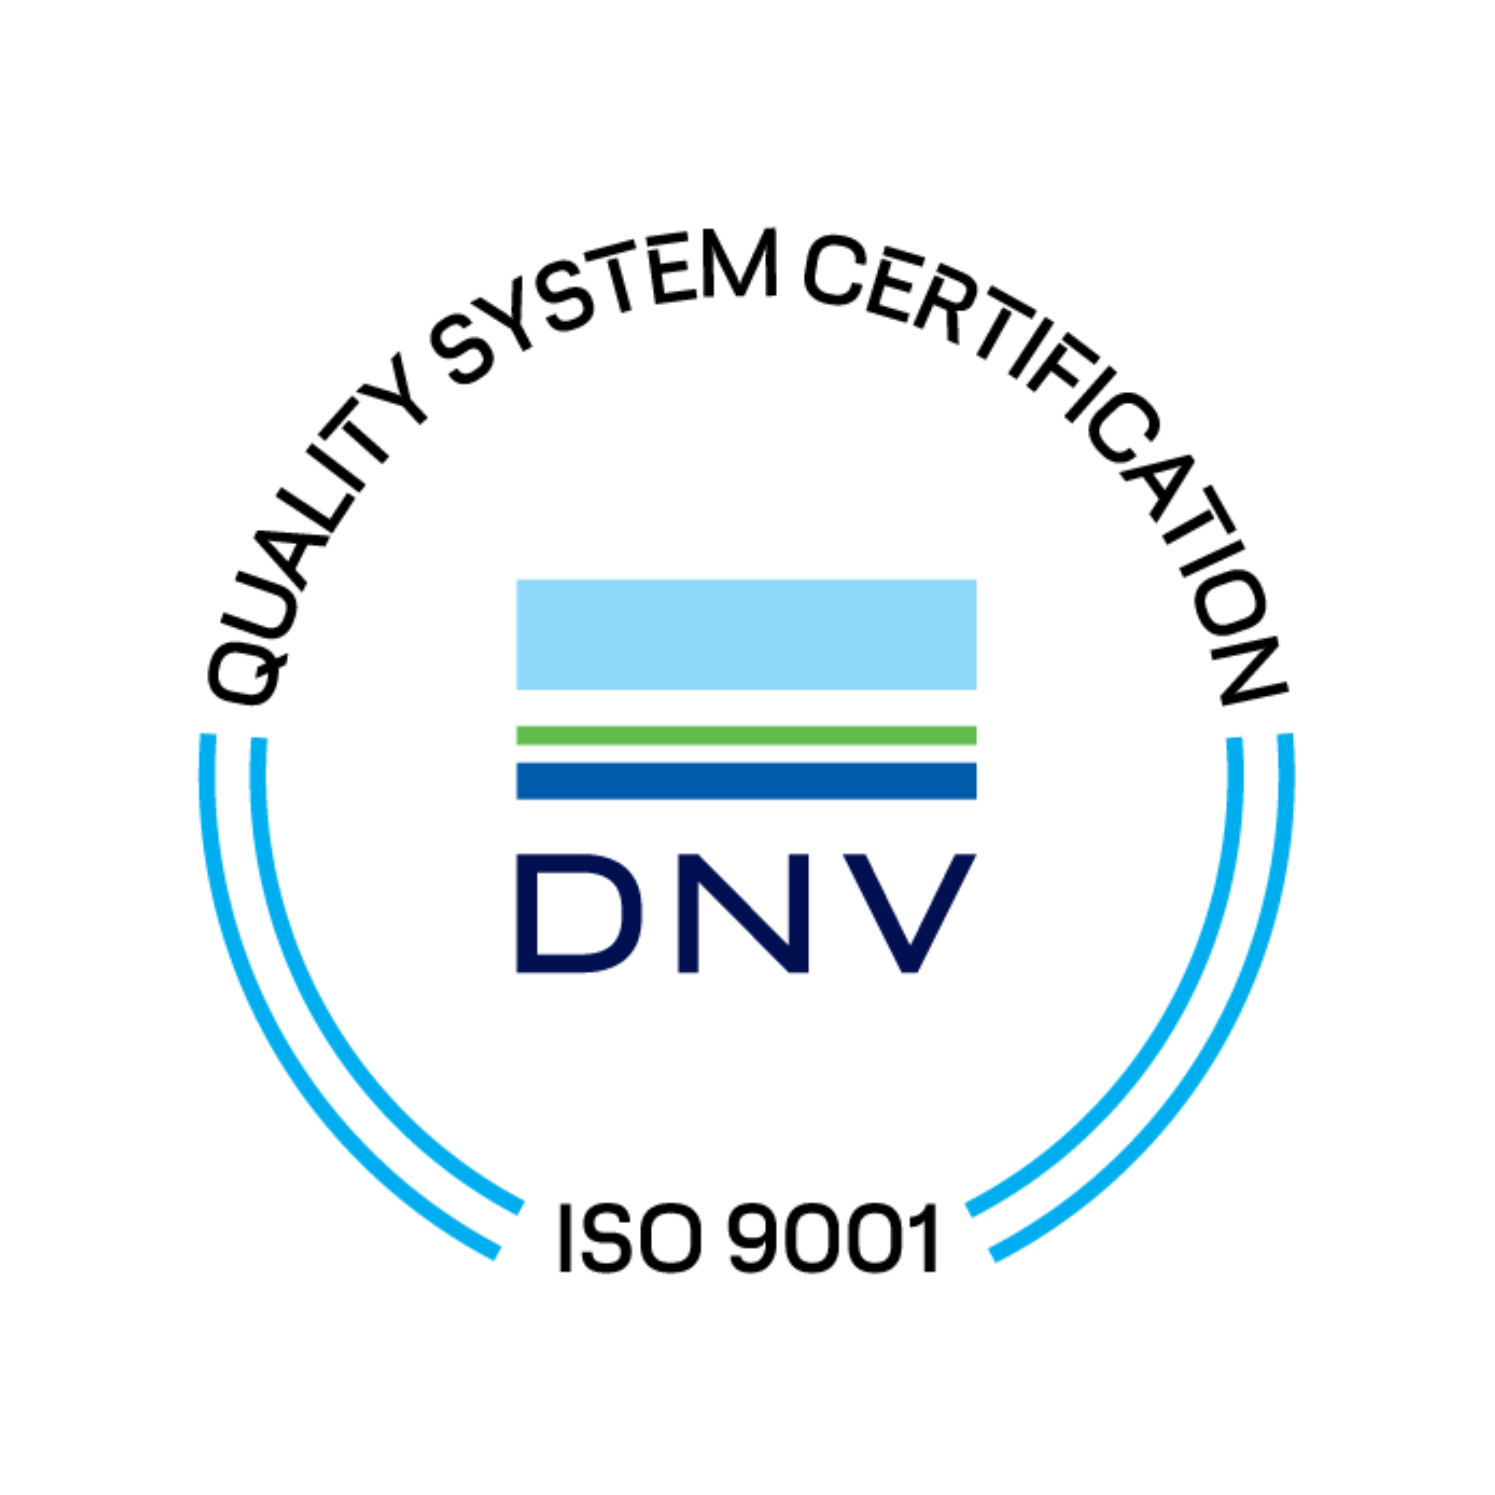 Quality System Certification ISO 9001 - DNV